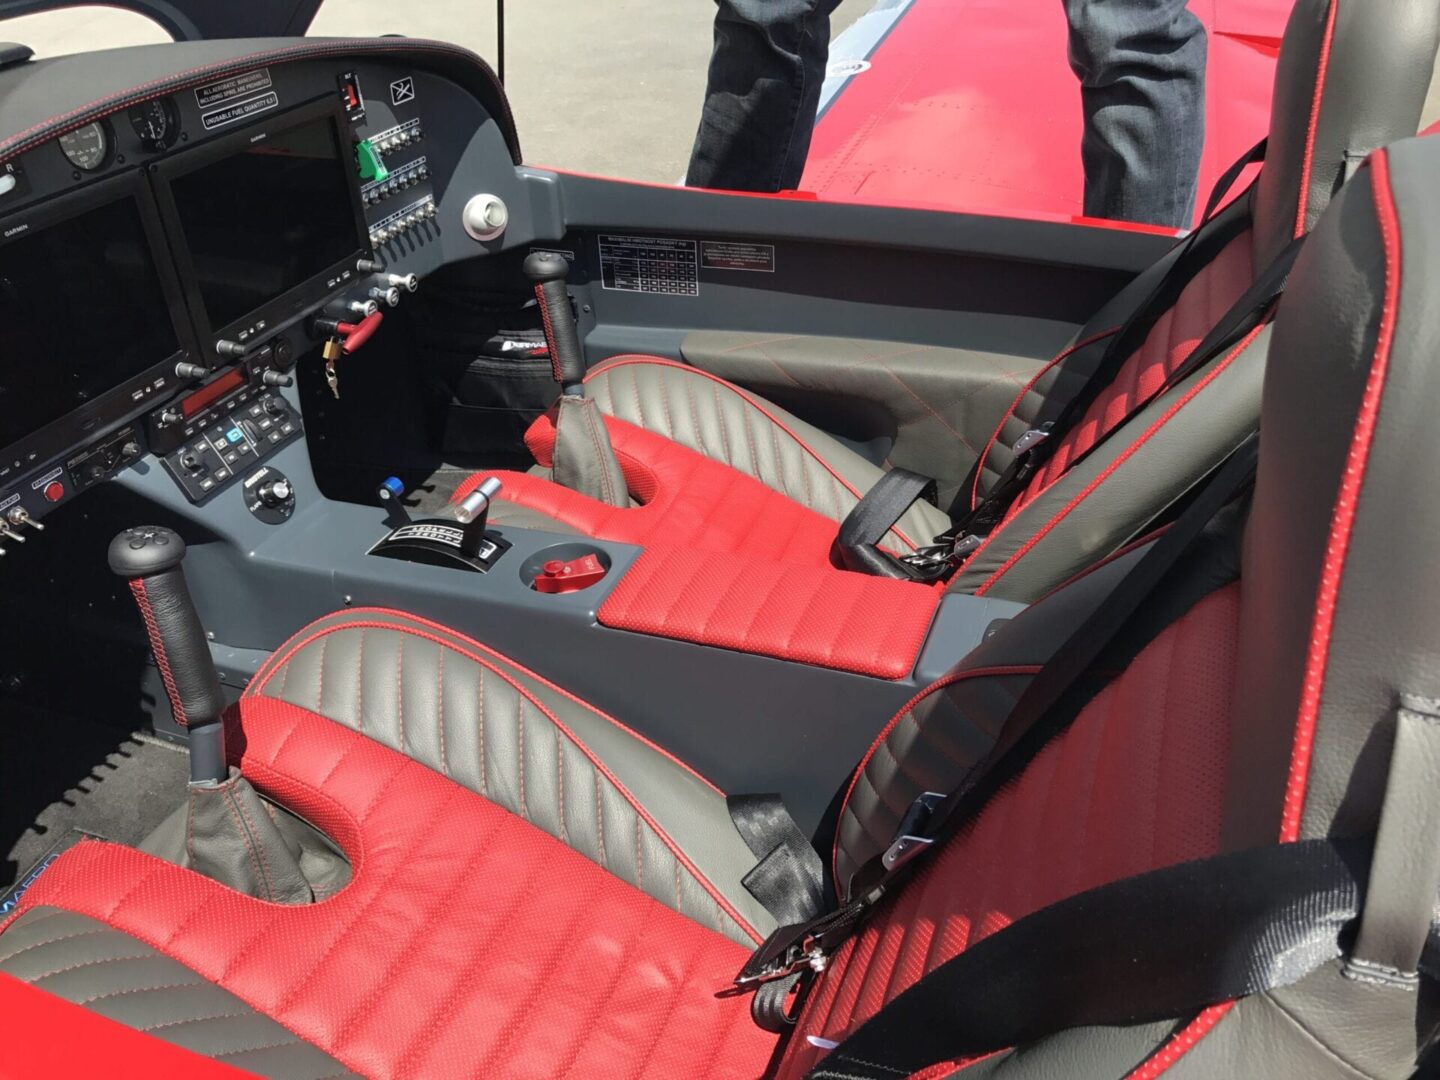 A red and black car with two seats in it